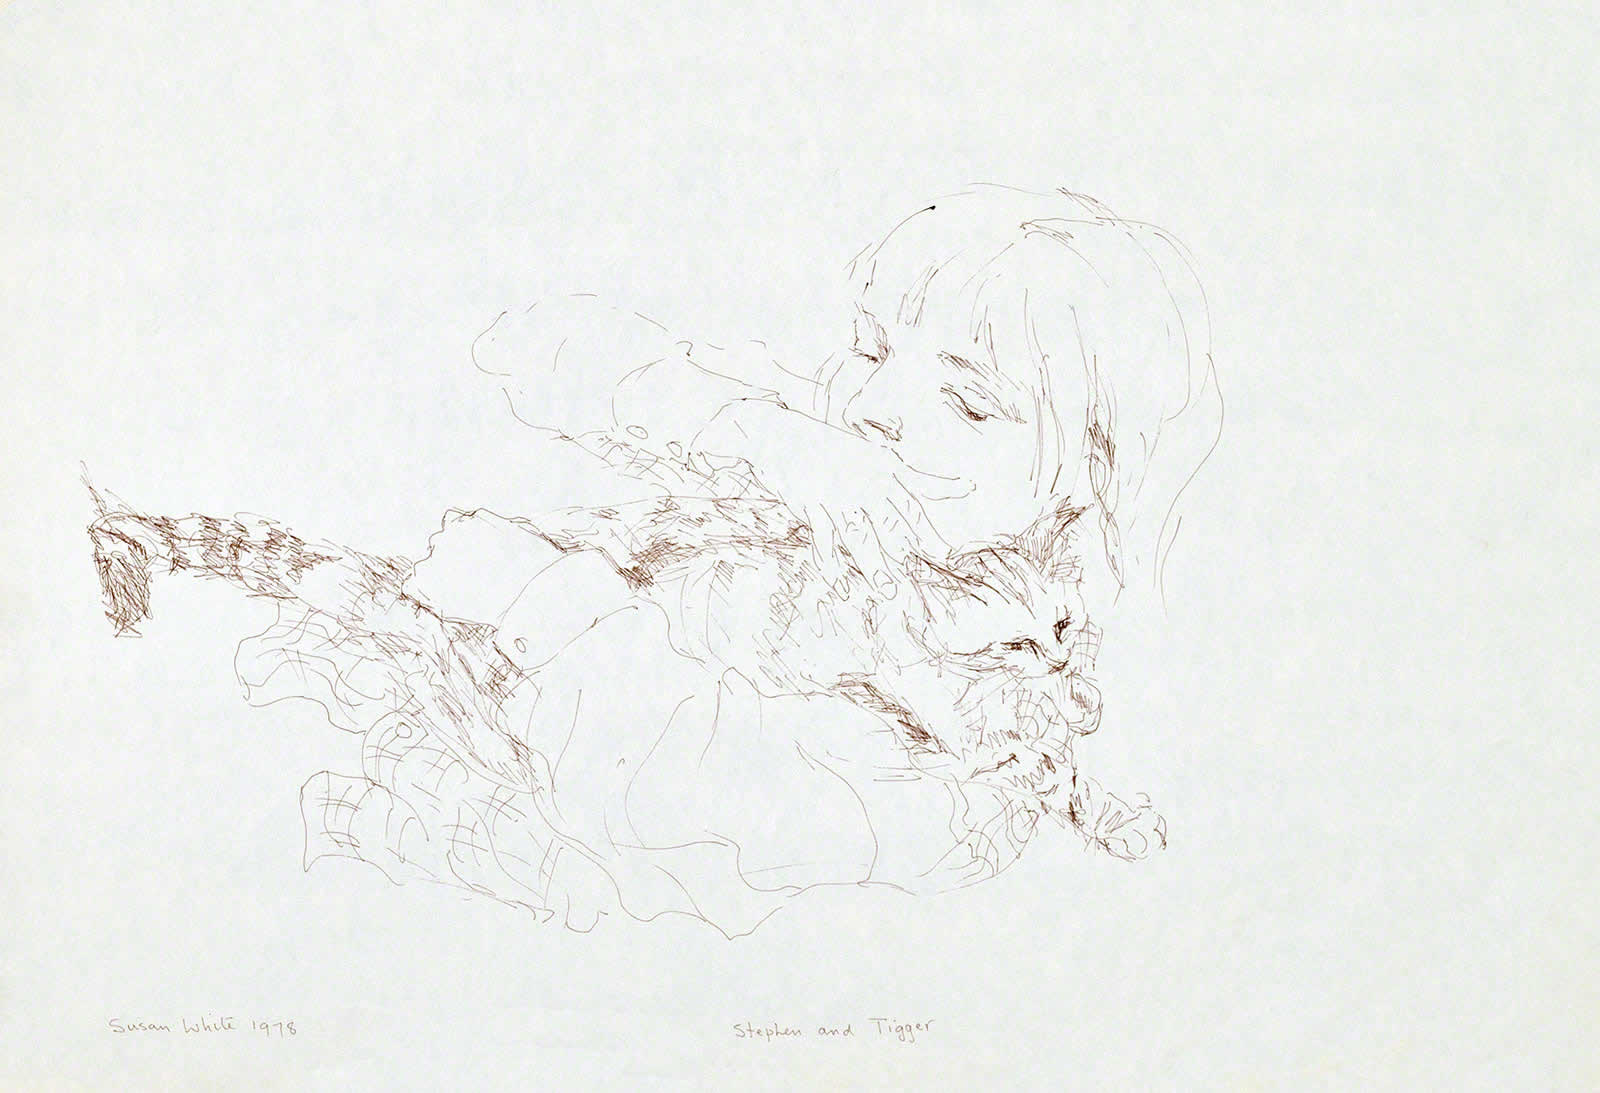 Stephen and Tigger - study for etching by Susan Dorothea White